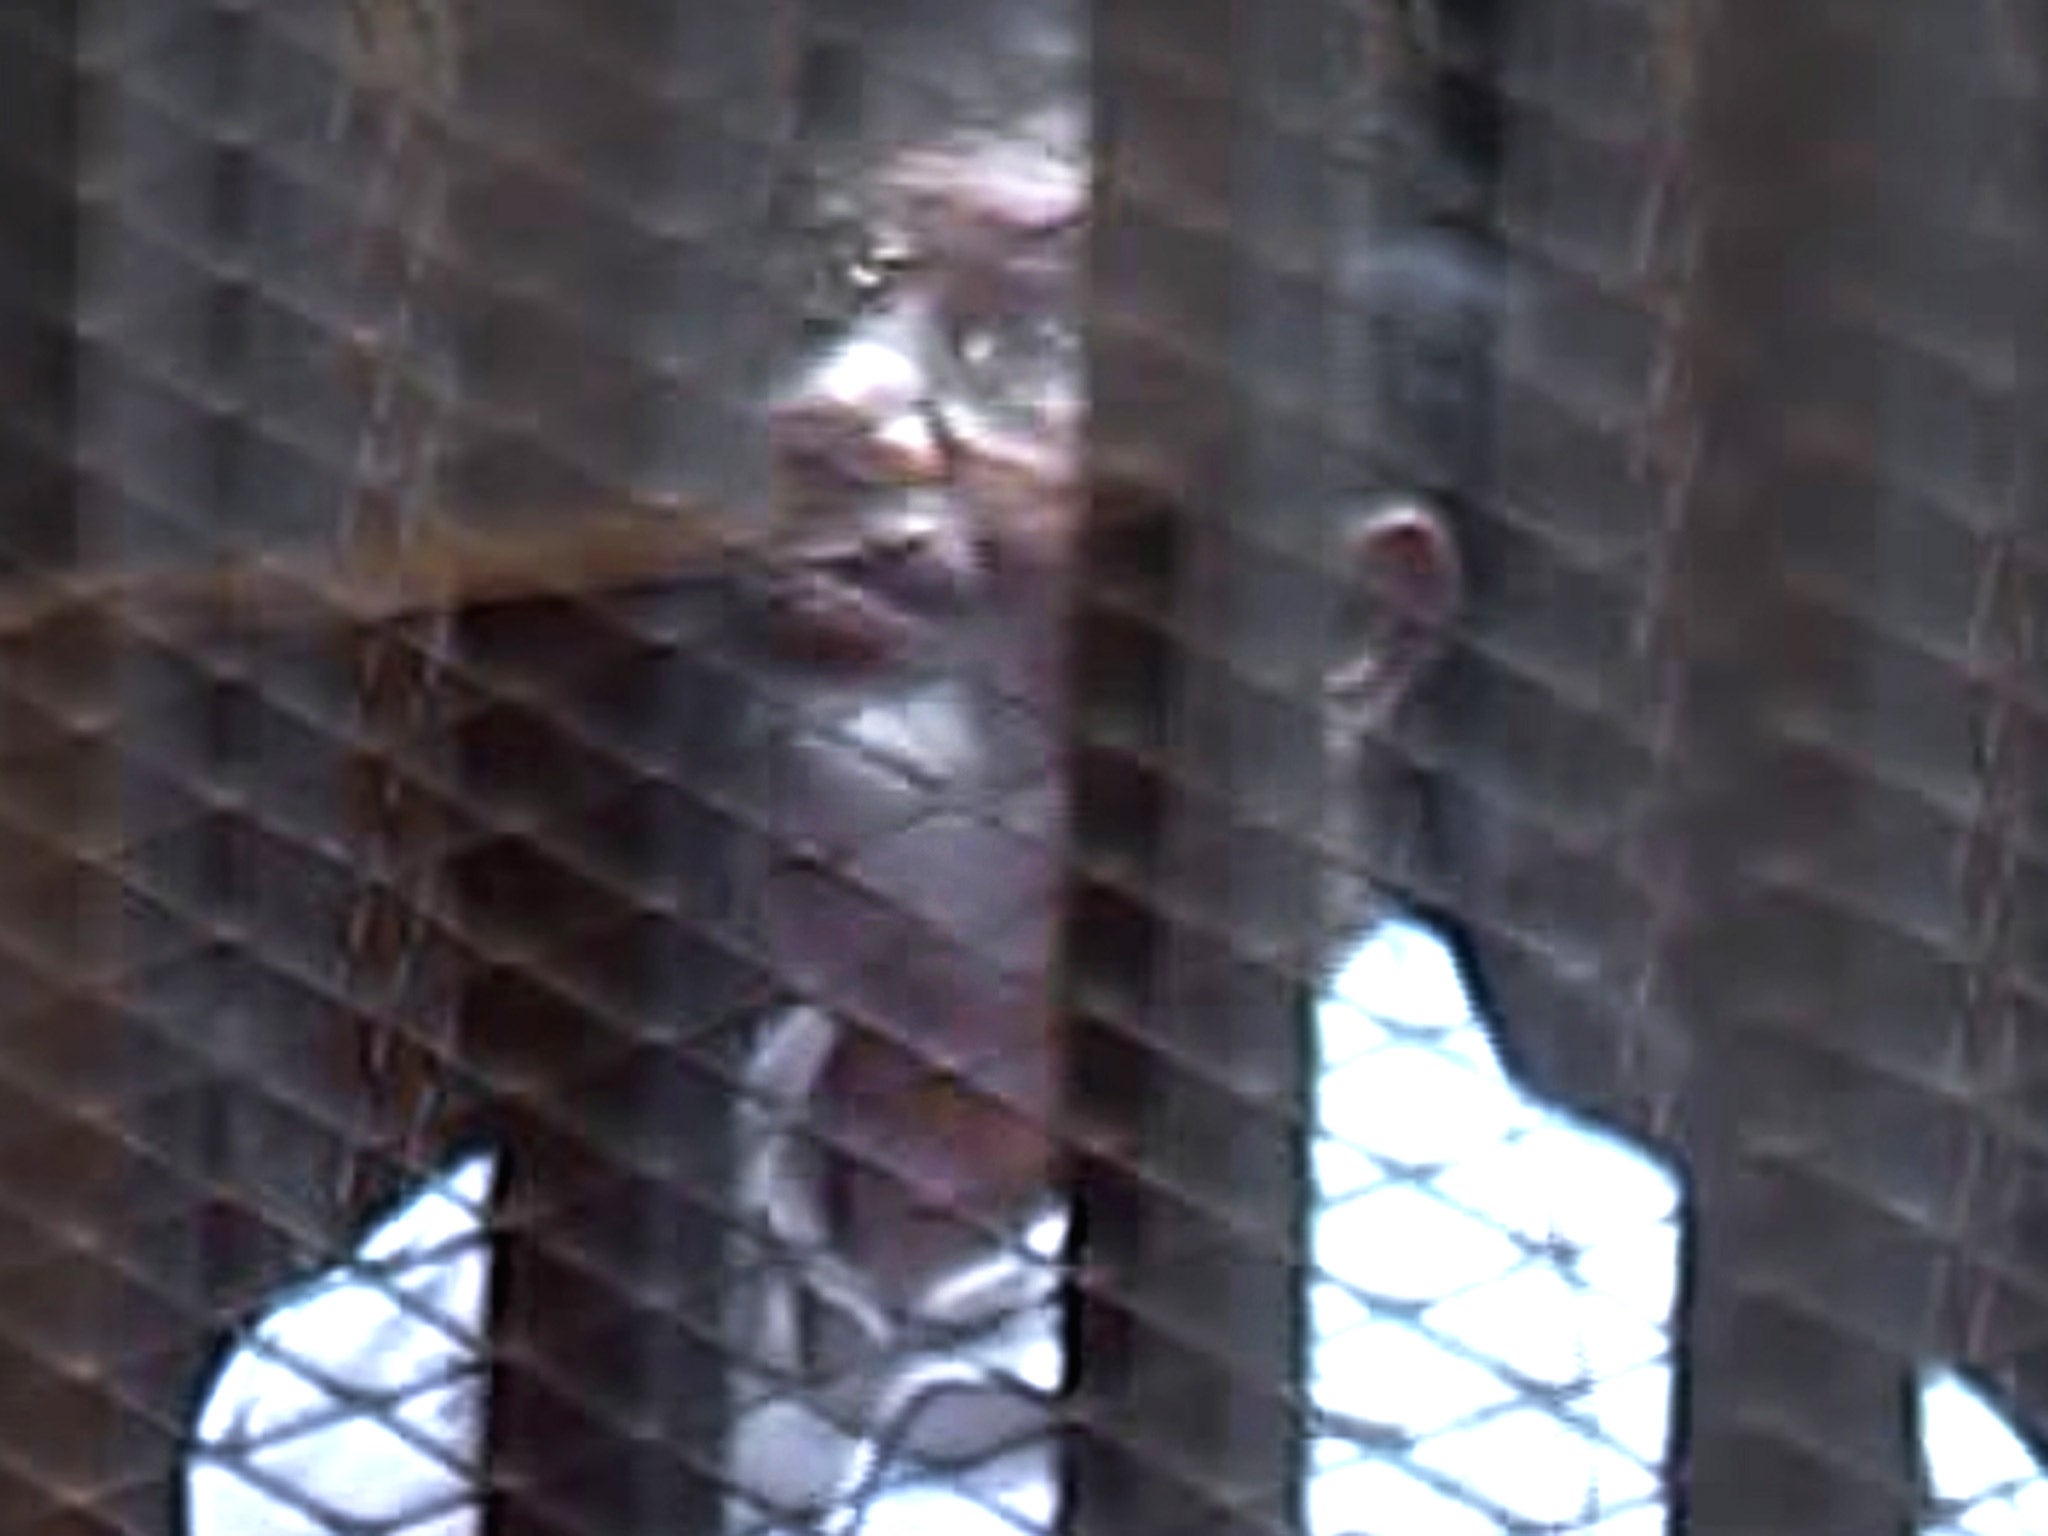 Former President Morsi stands inside a glass-encased metal cage in the Cairo courtroom